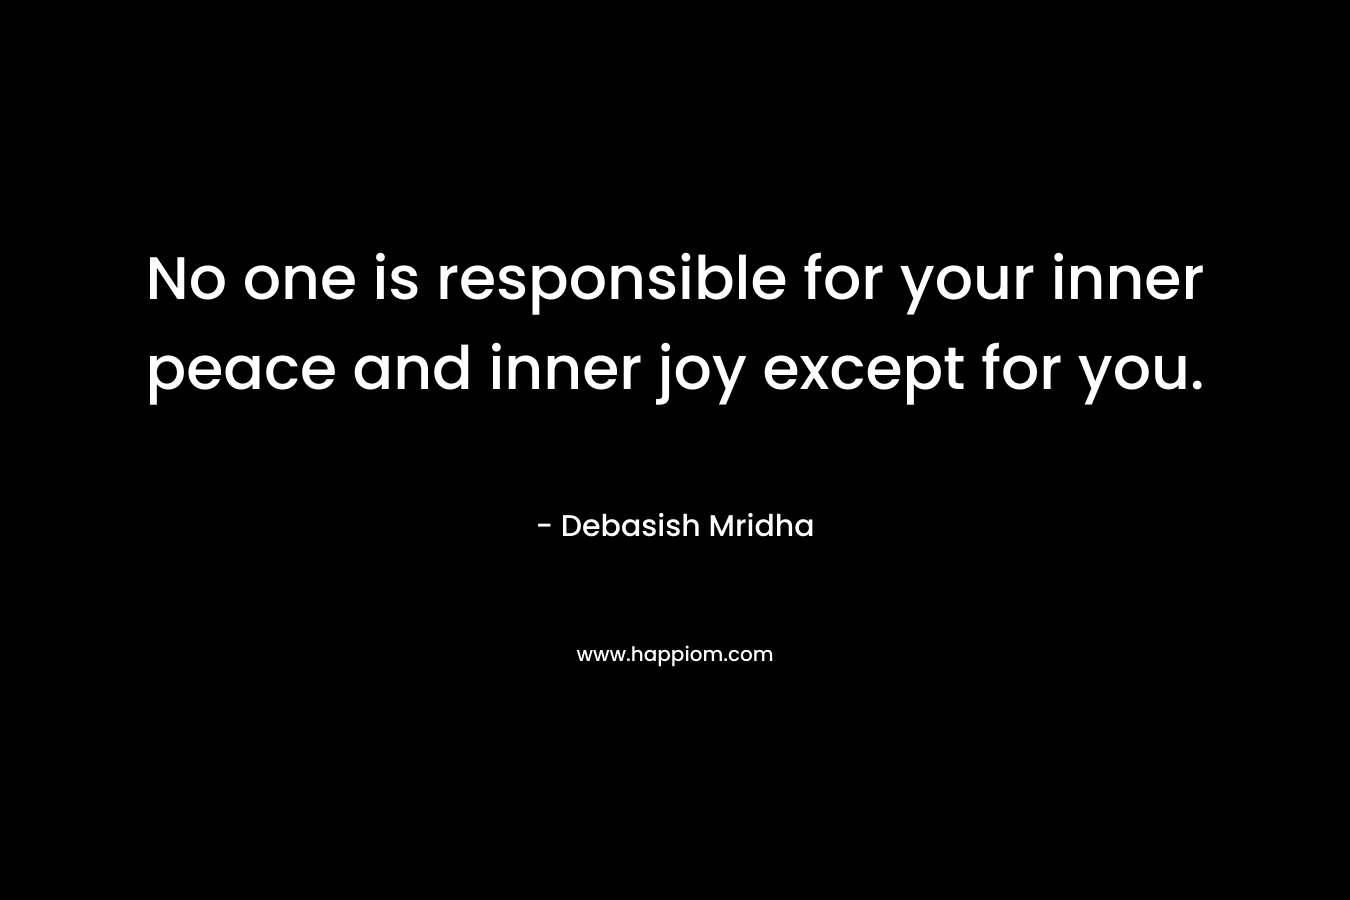 No one is responsible for your inner peace and inner joy except for you.